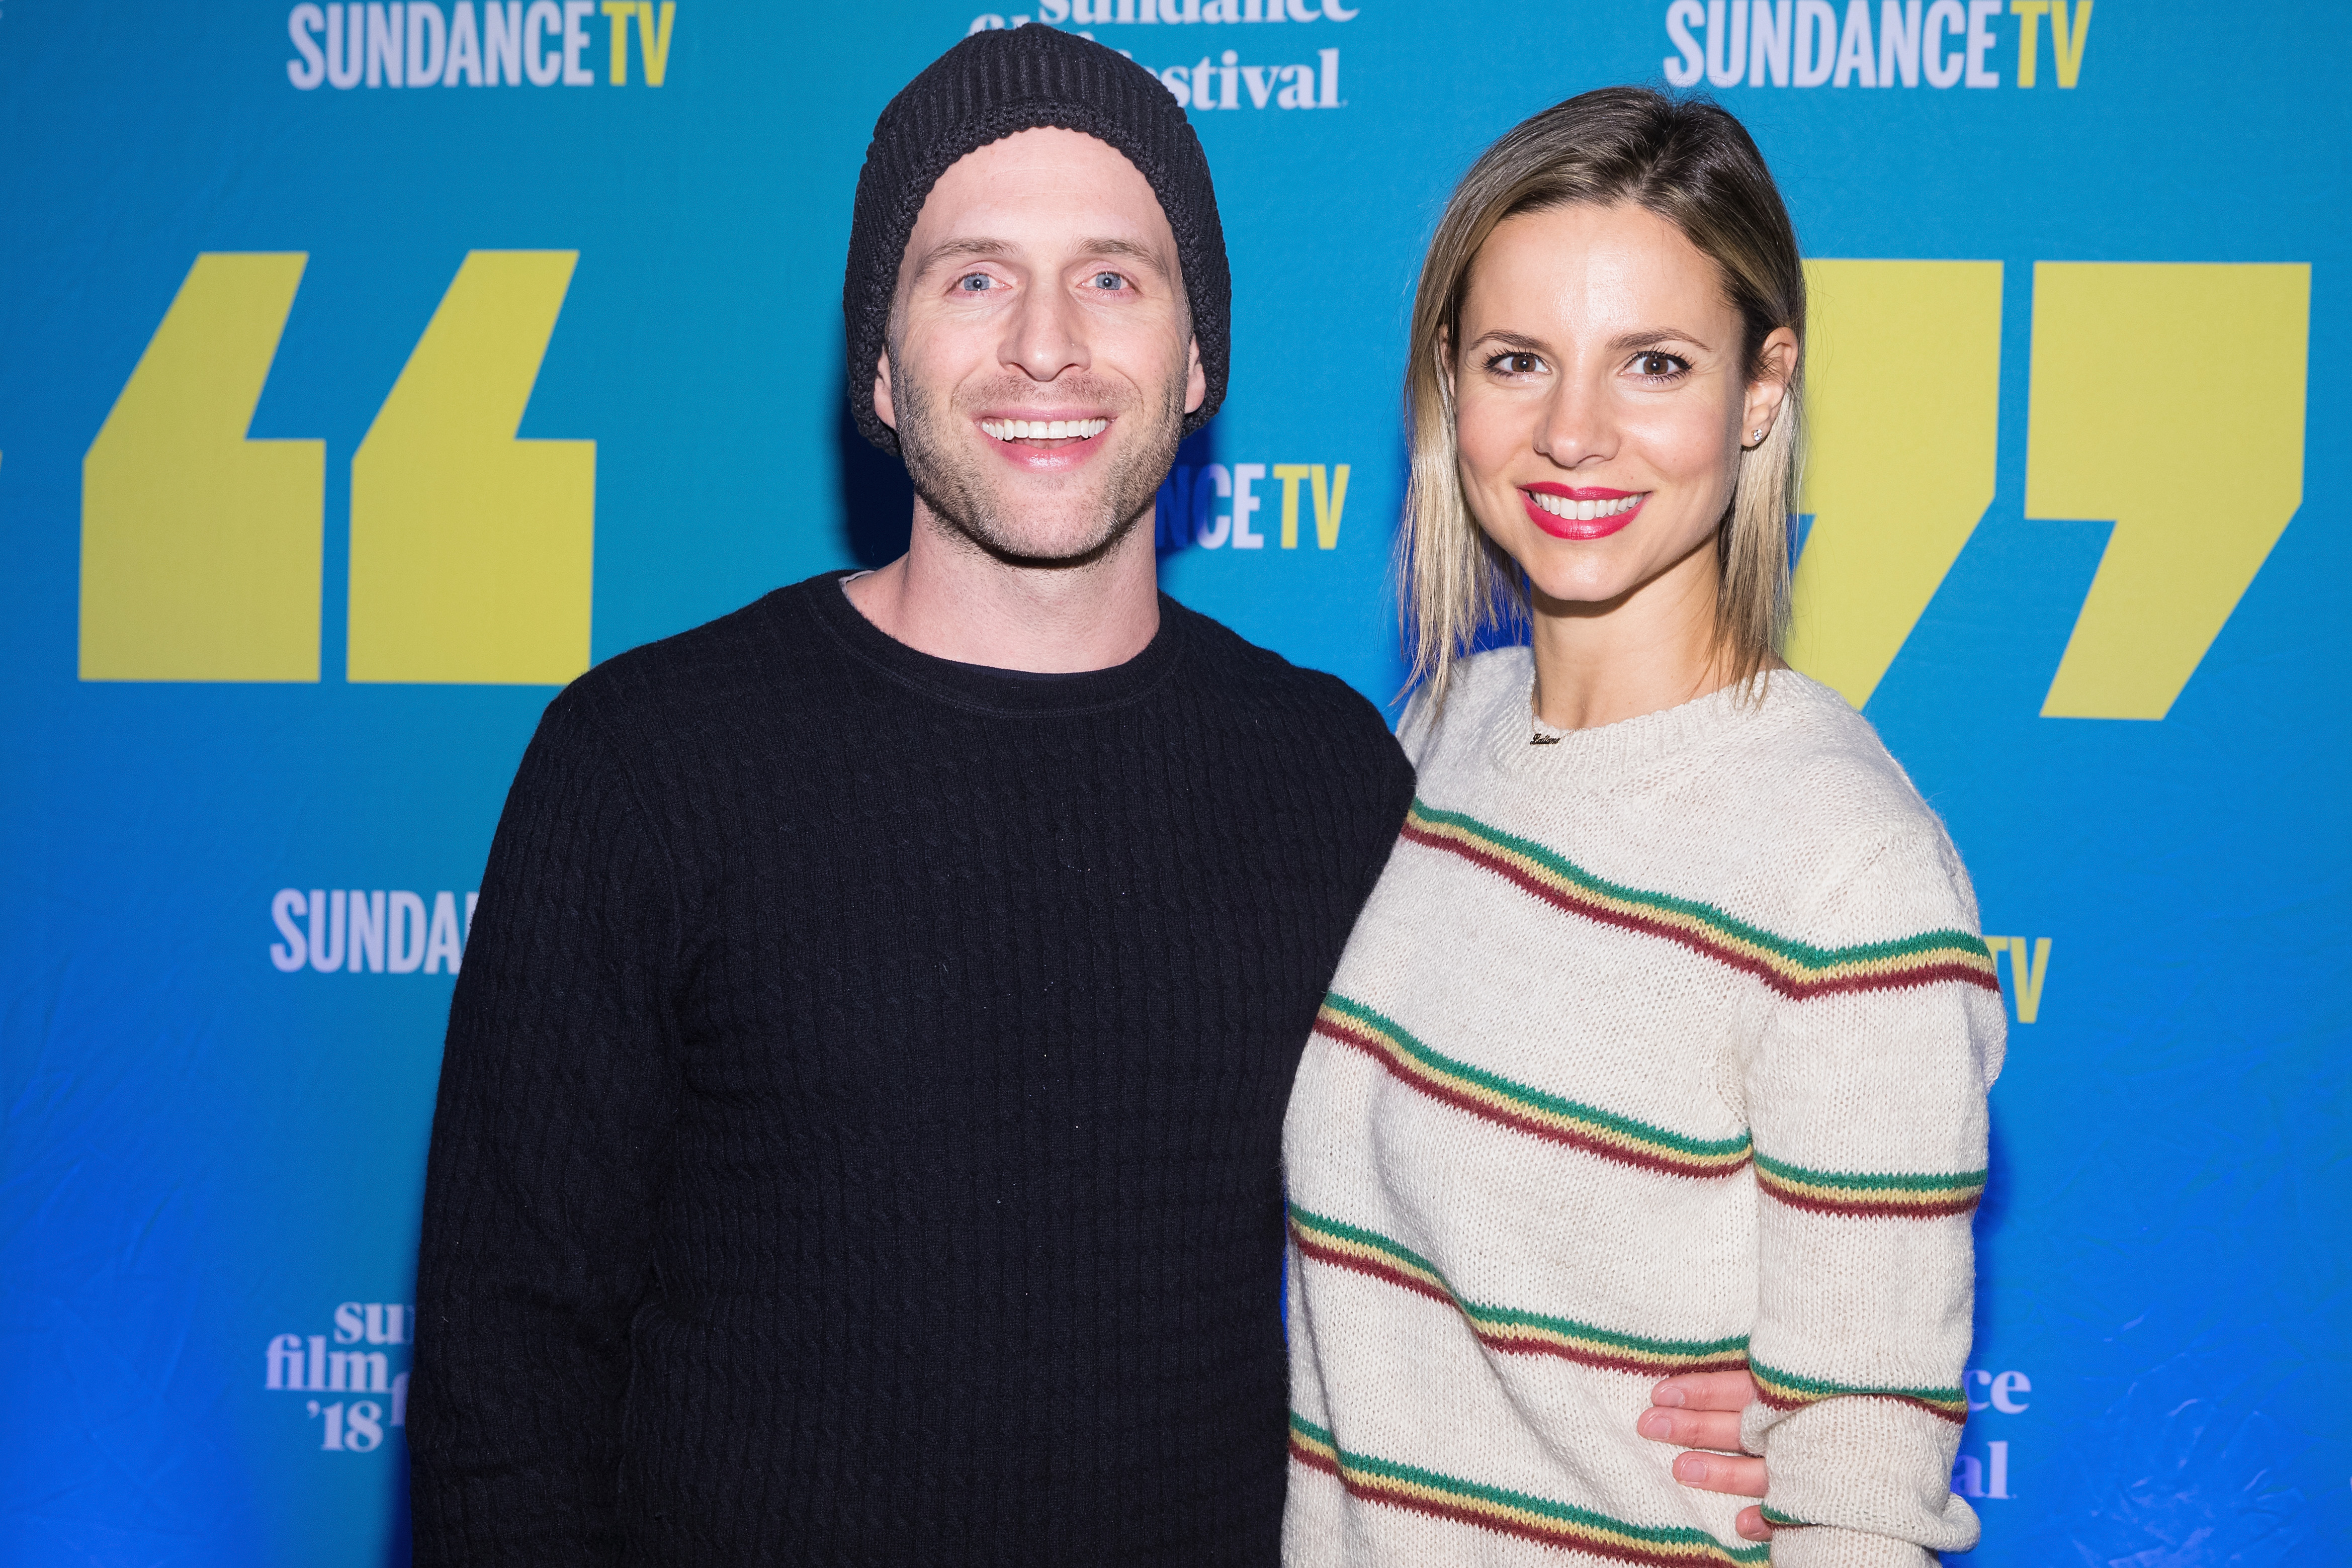 Glenn Howerton and his wife actress Jill Latiano attend the 2018 Sundance Film Festival Official Kickoff Party at Sundance TV HQ on January 19, 2018 in Park City, Utah | Source: Getty Images